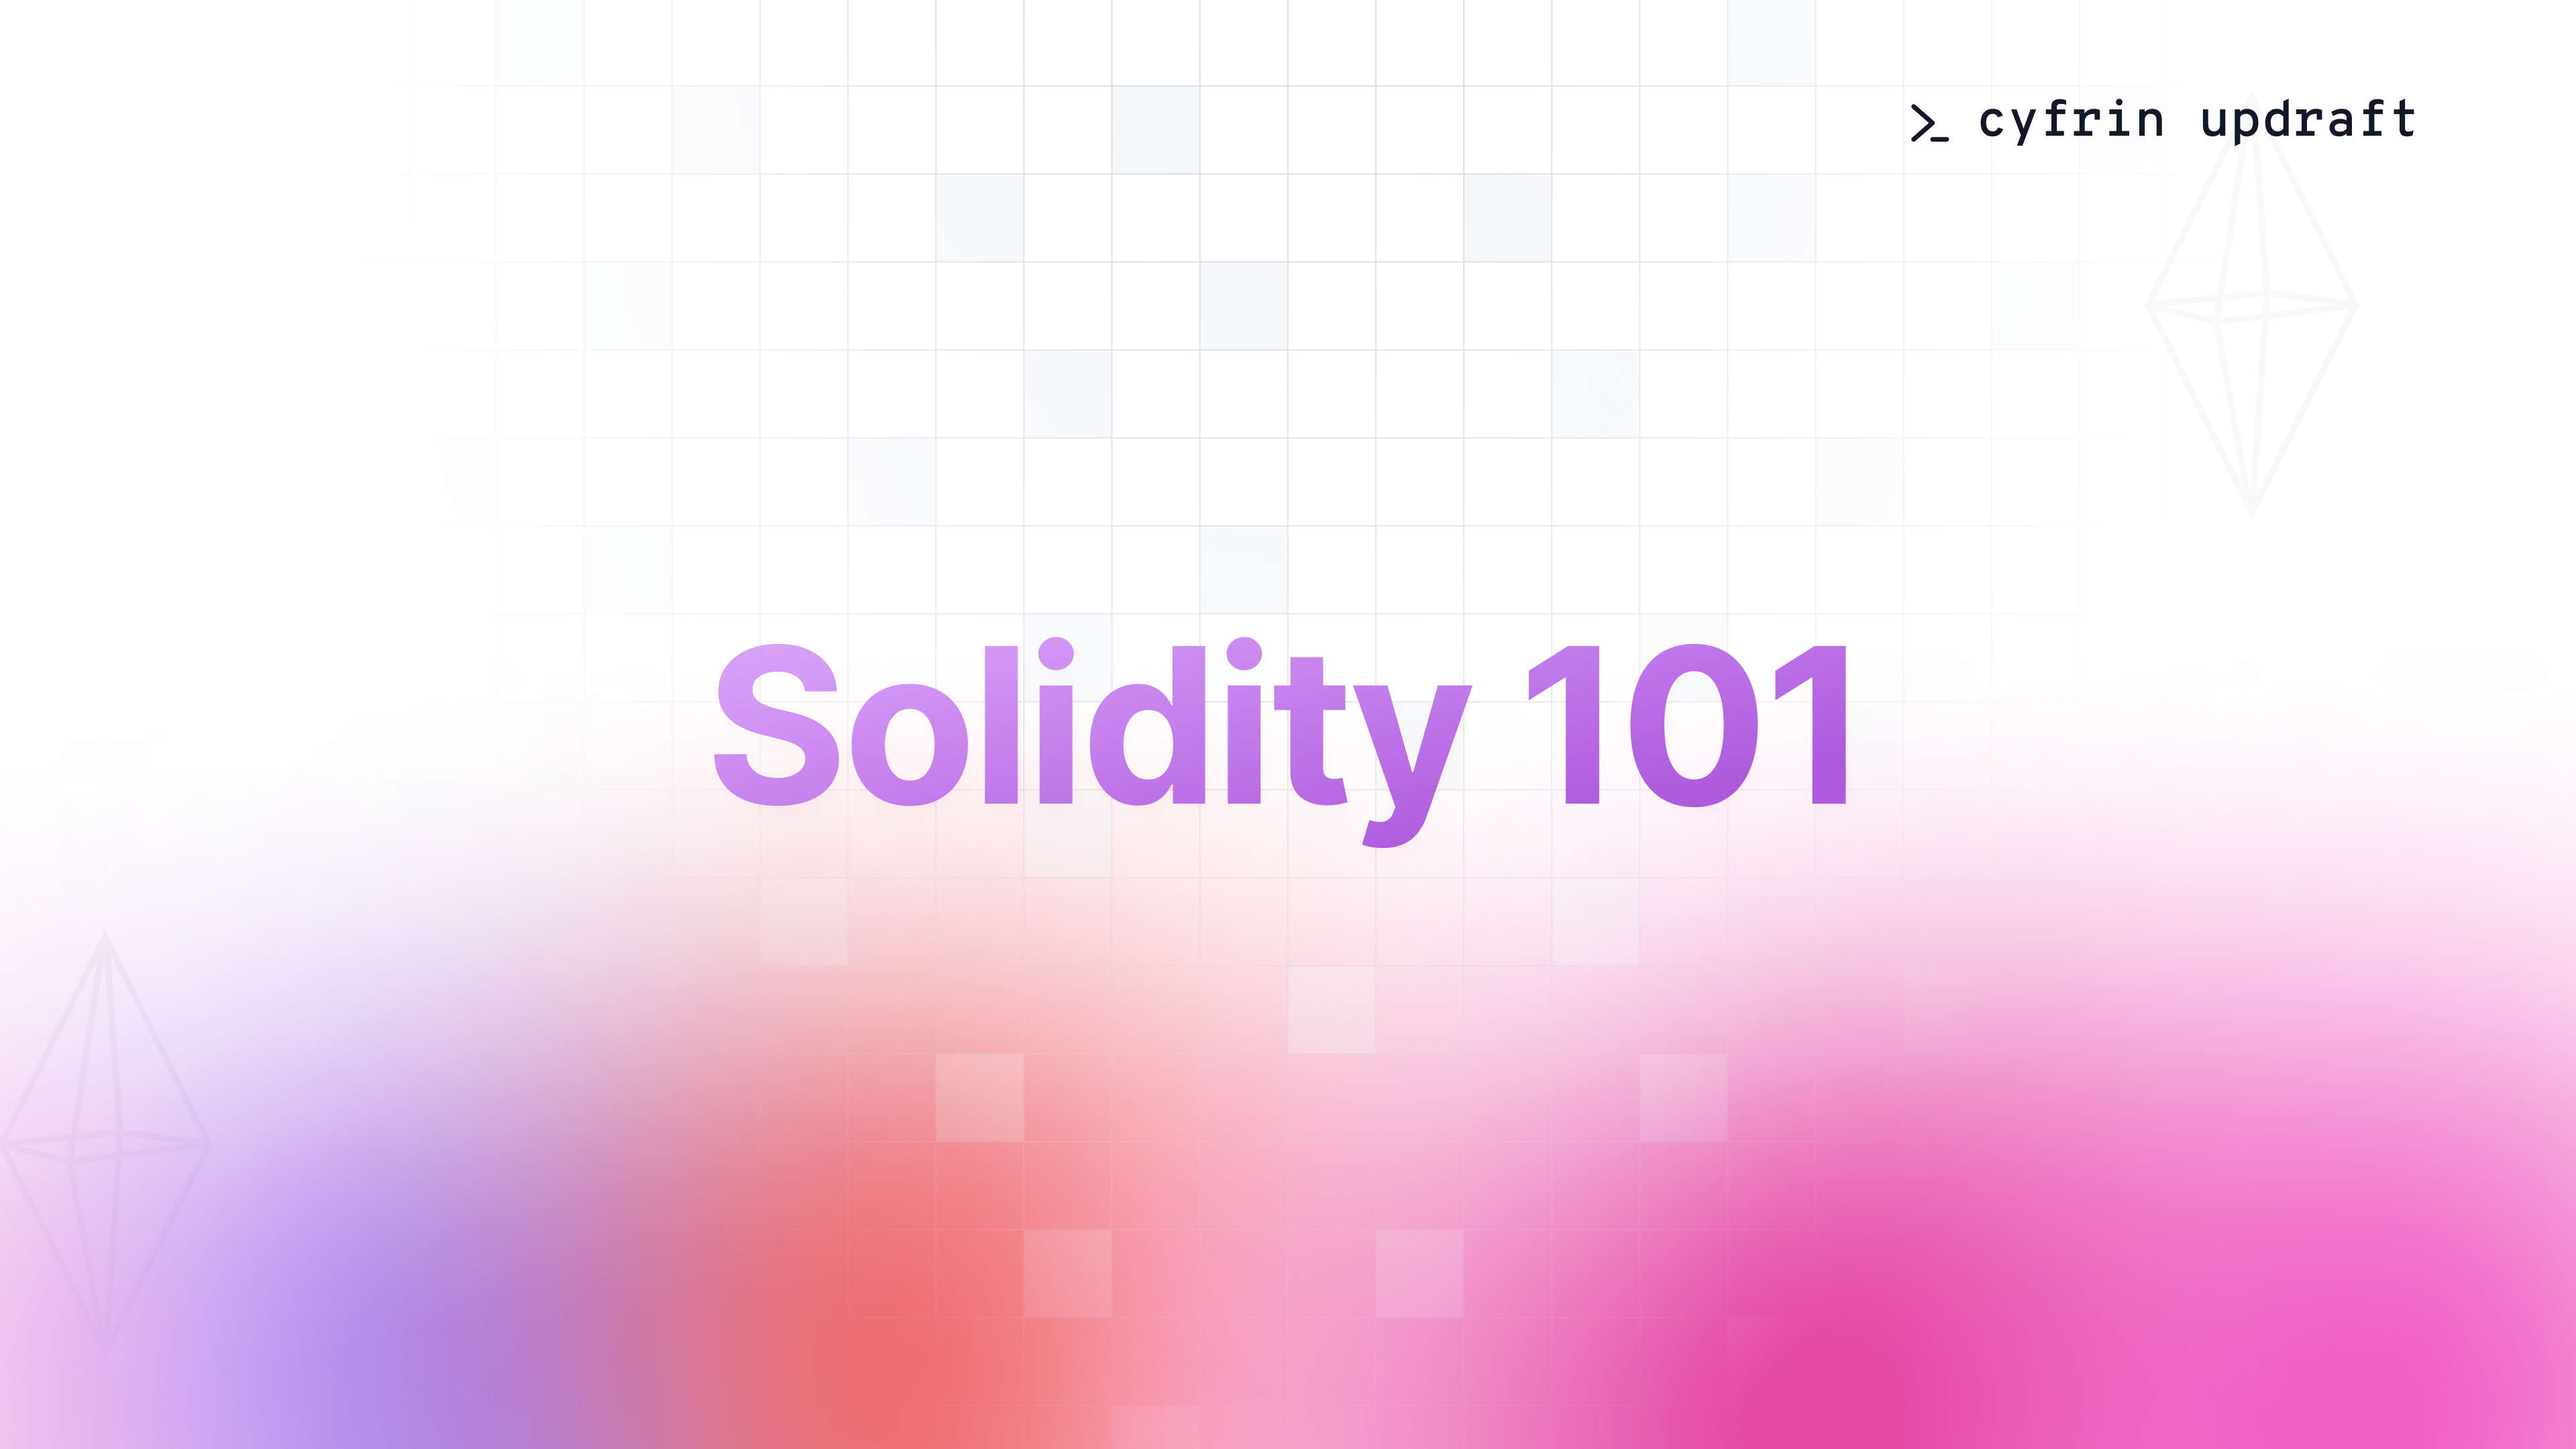 Smart contract development with Solidity